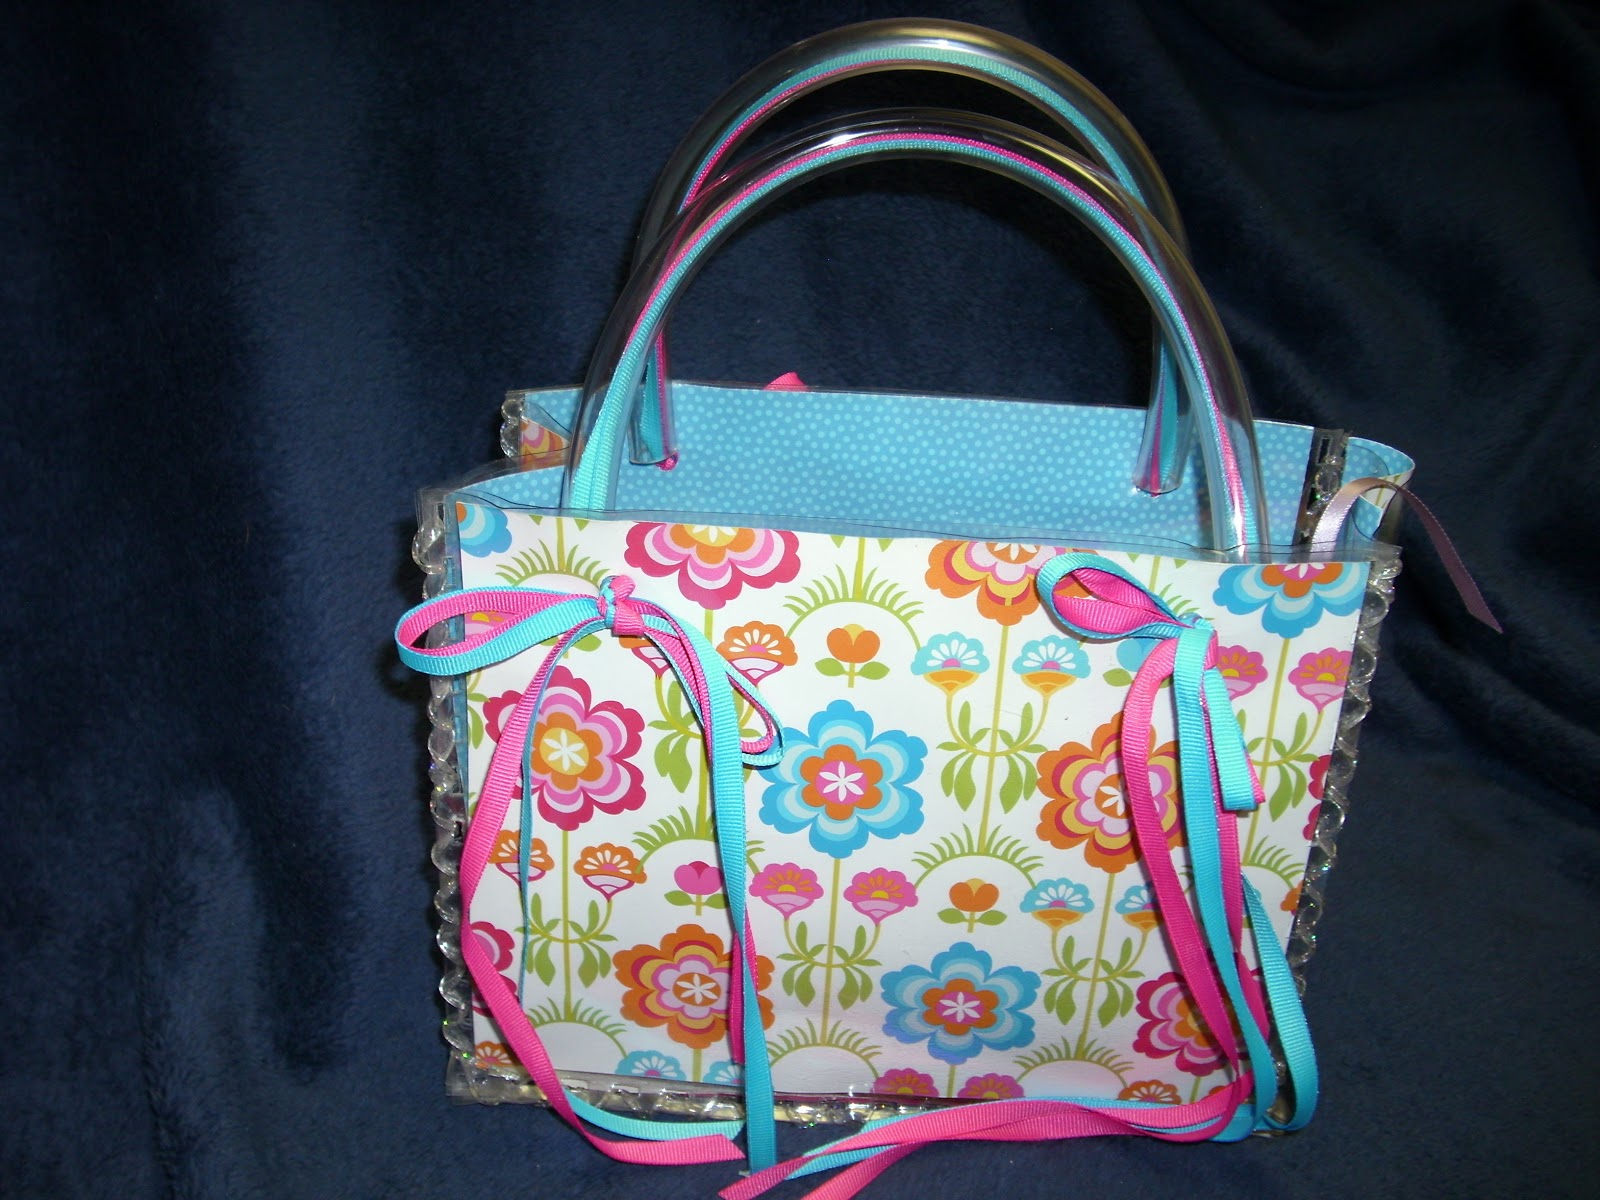 Value-able Ideas: Ribbons and Vinyl Scripture Bag